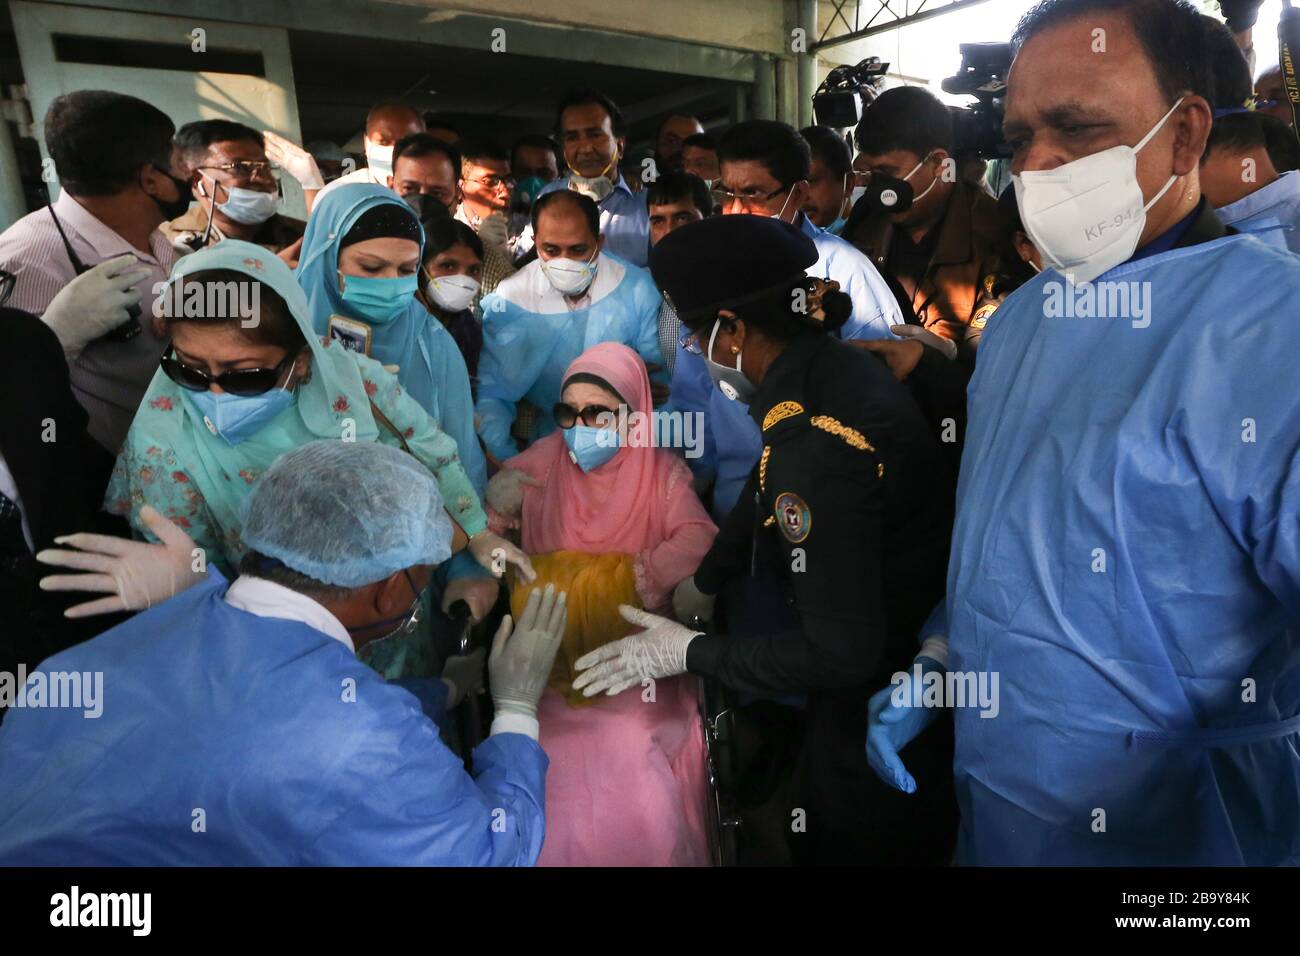 (200325) -- DHAKA, March 25, 2020 (Xinhua) -- Bangladeshi ex-Prime Minister Khaleda Zia in pink clothes leaves the Bangabandhu Sheikh Mujib Medical University (BSMMU) in Dhaka, Bangladesh, March 25, 2020. Khaleda Zia has been released from jail for six months on humanitarian grounds in light of the COVID-19 outbreak in the country. Zia, also chairperson of Bangladesh Nationalist Party (BNP), at around 4:15 p.m. local time on Wednesday, came out of Bangabandhu Sheikh Mujib Medical University (BSMMU) in capital Dhaka, where she was being treated. In April 2018, Zia was shifted to the BSMM Stock Photo